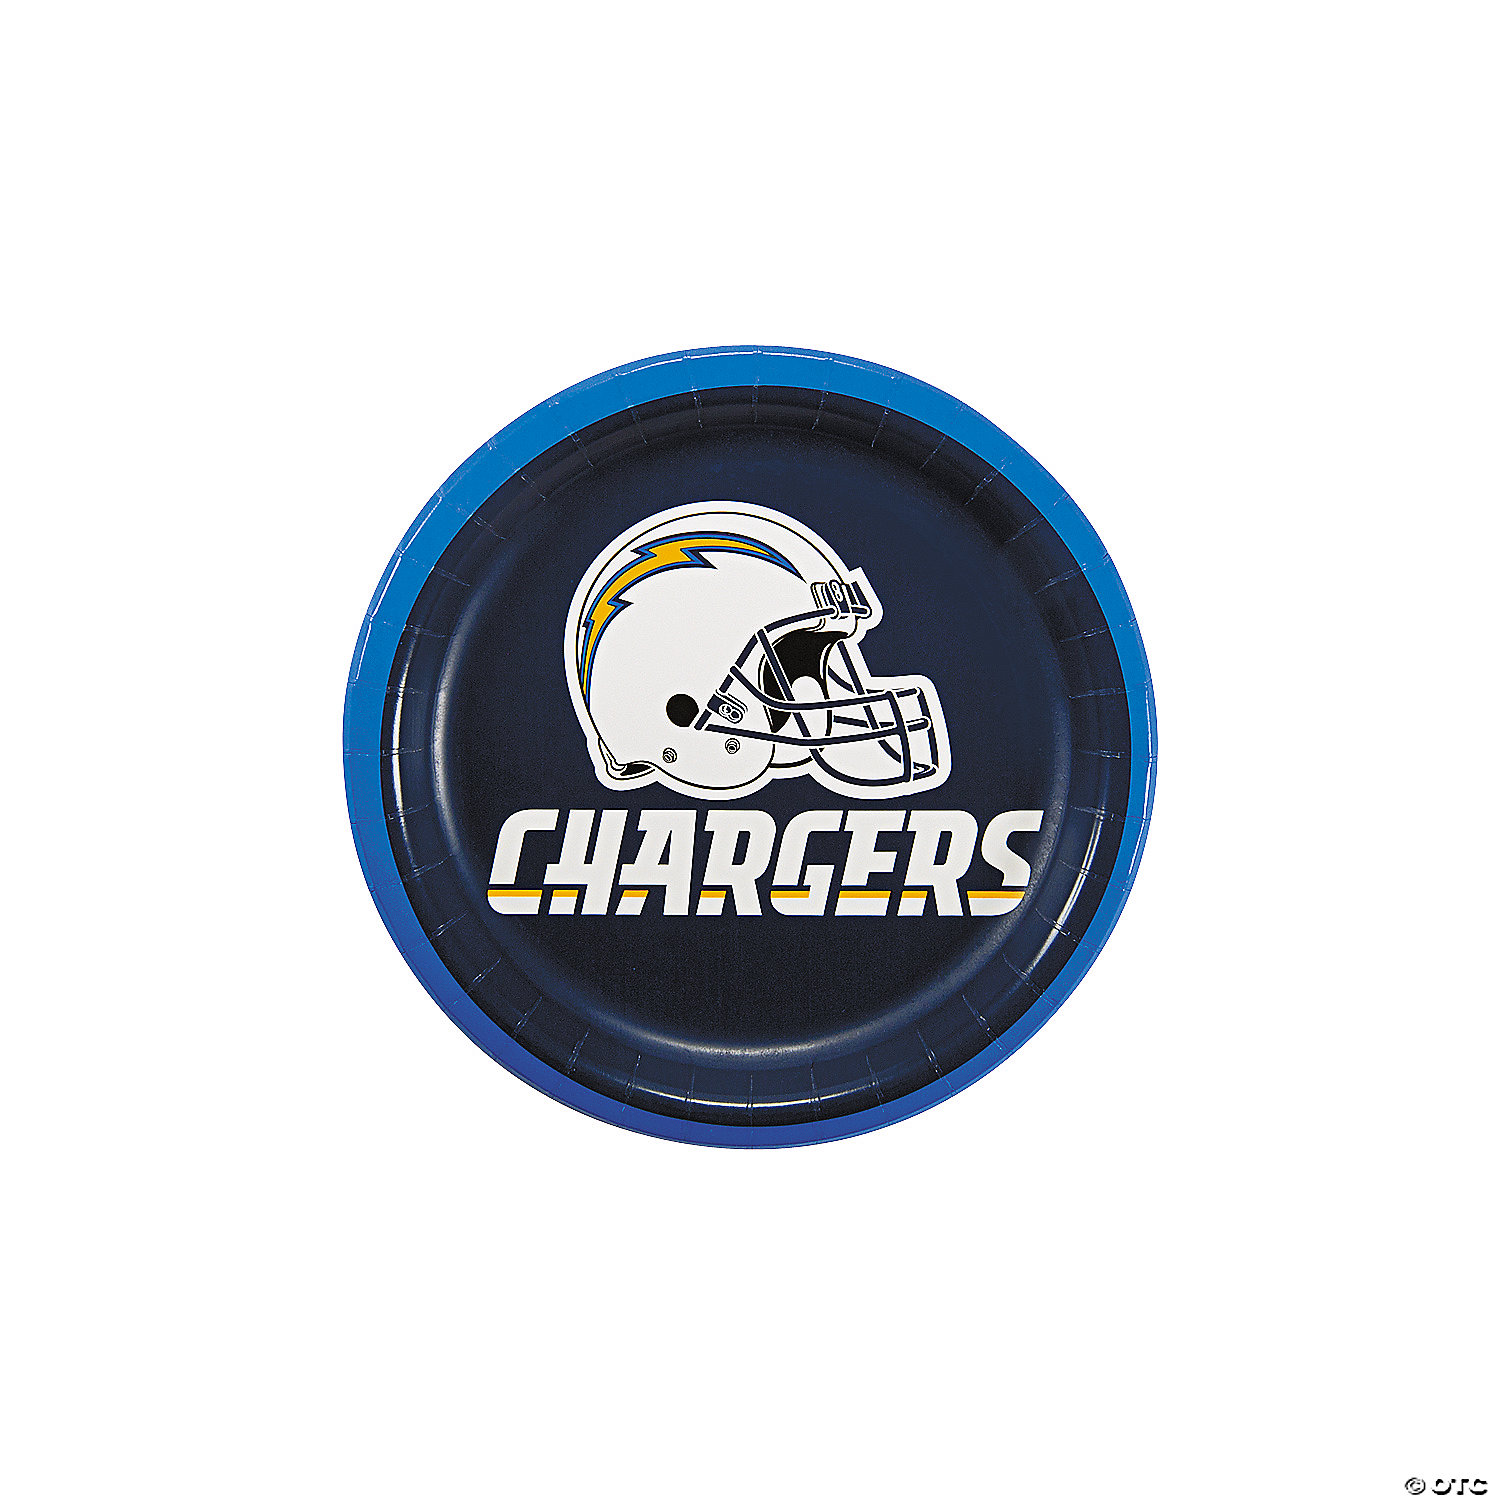 nfl san diego chargers font